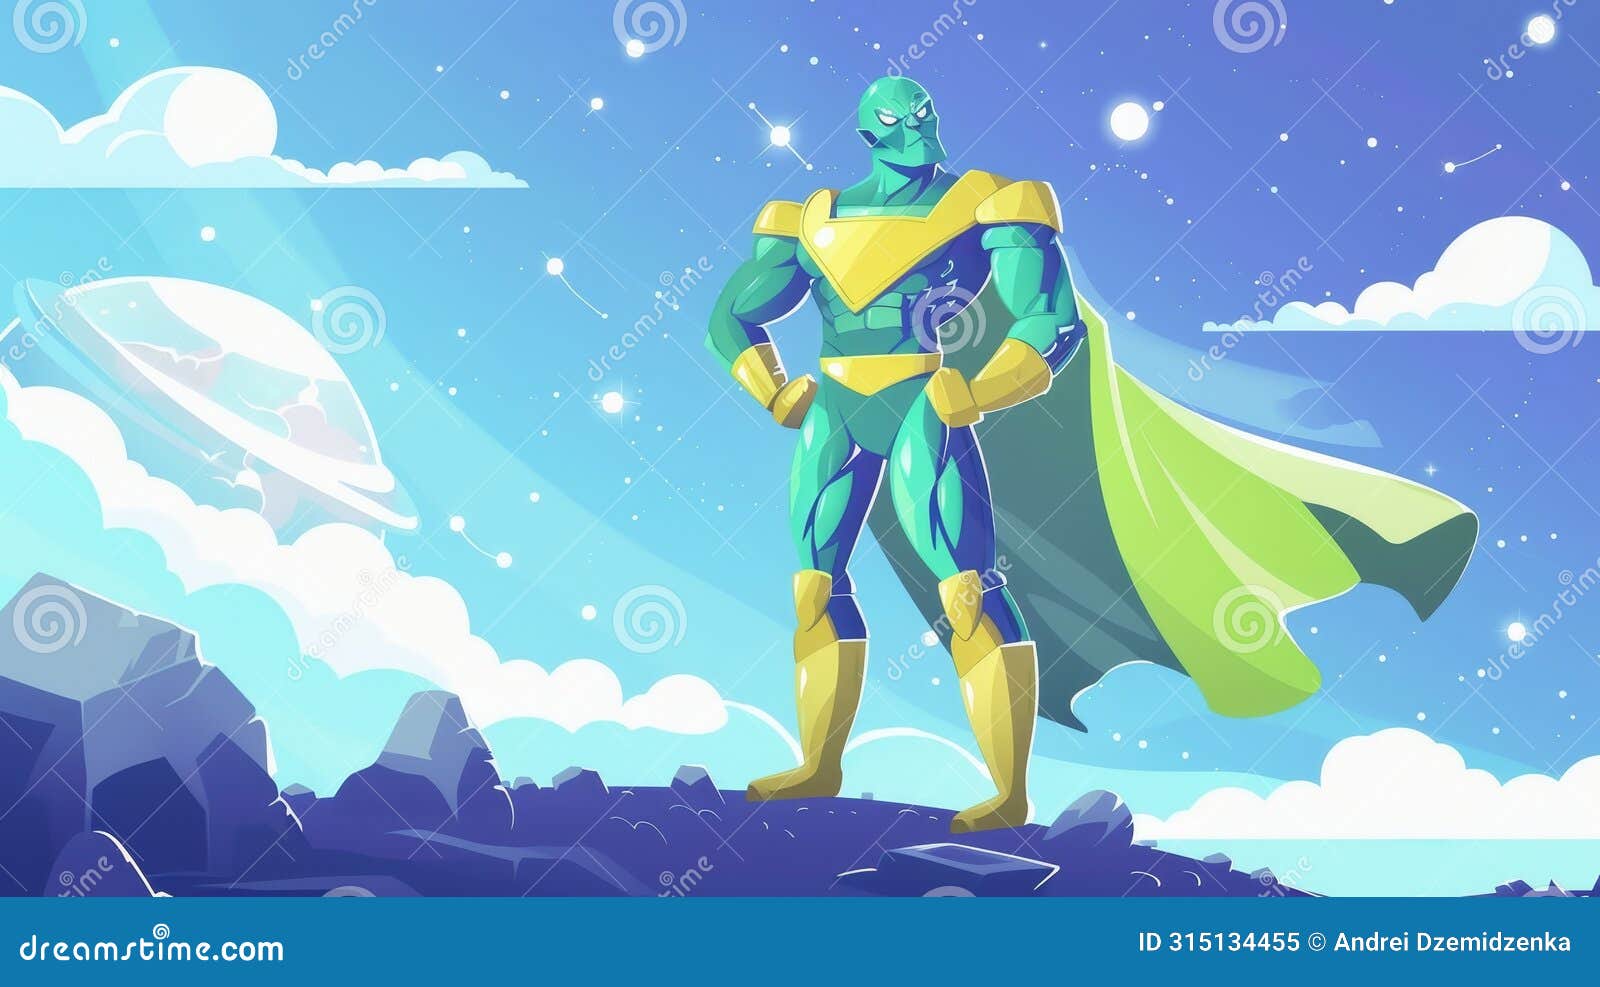 animated martian alien cartoon character stands with arms akimbo on extraterrestrial planet landscape. galaxy comer with